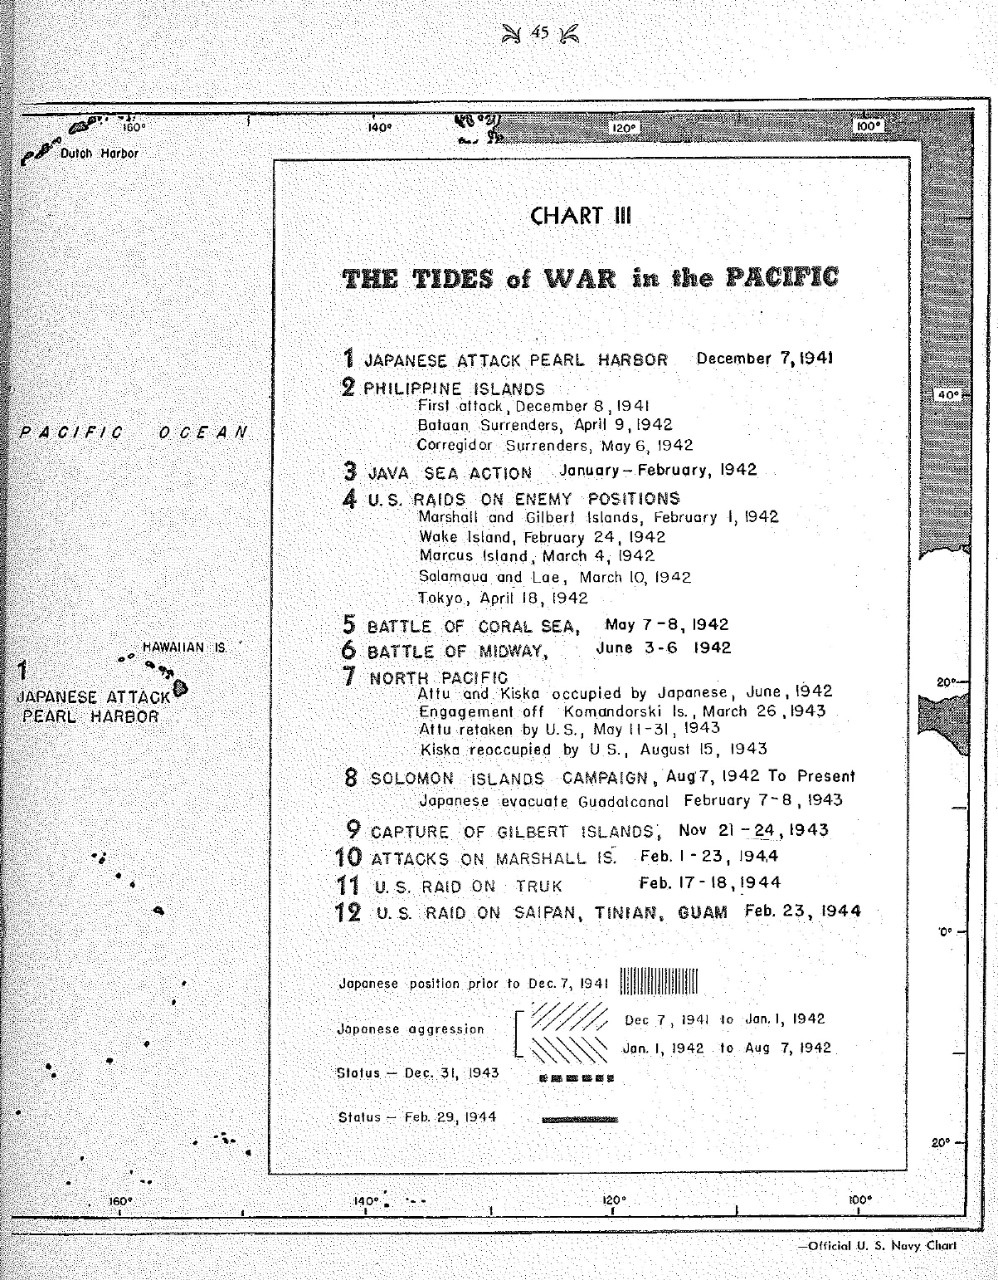 The tides of war in the Pacific, Chart III 